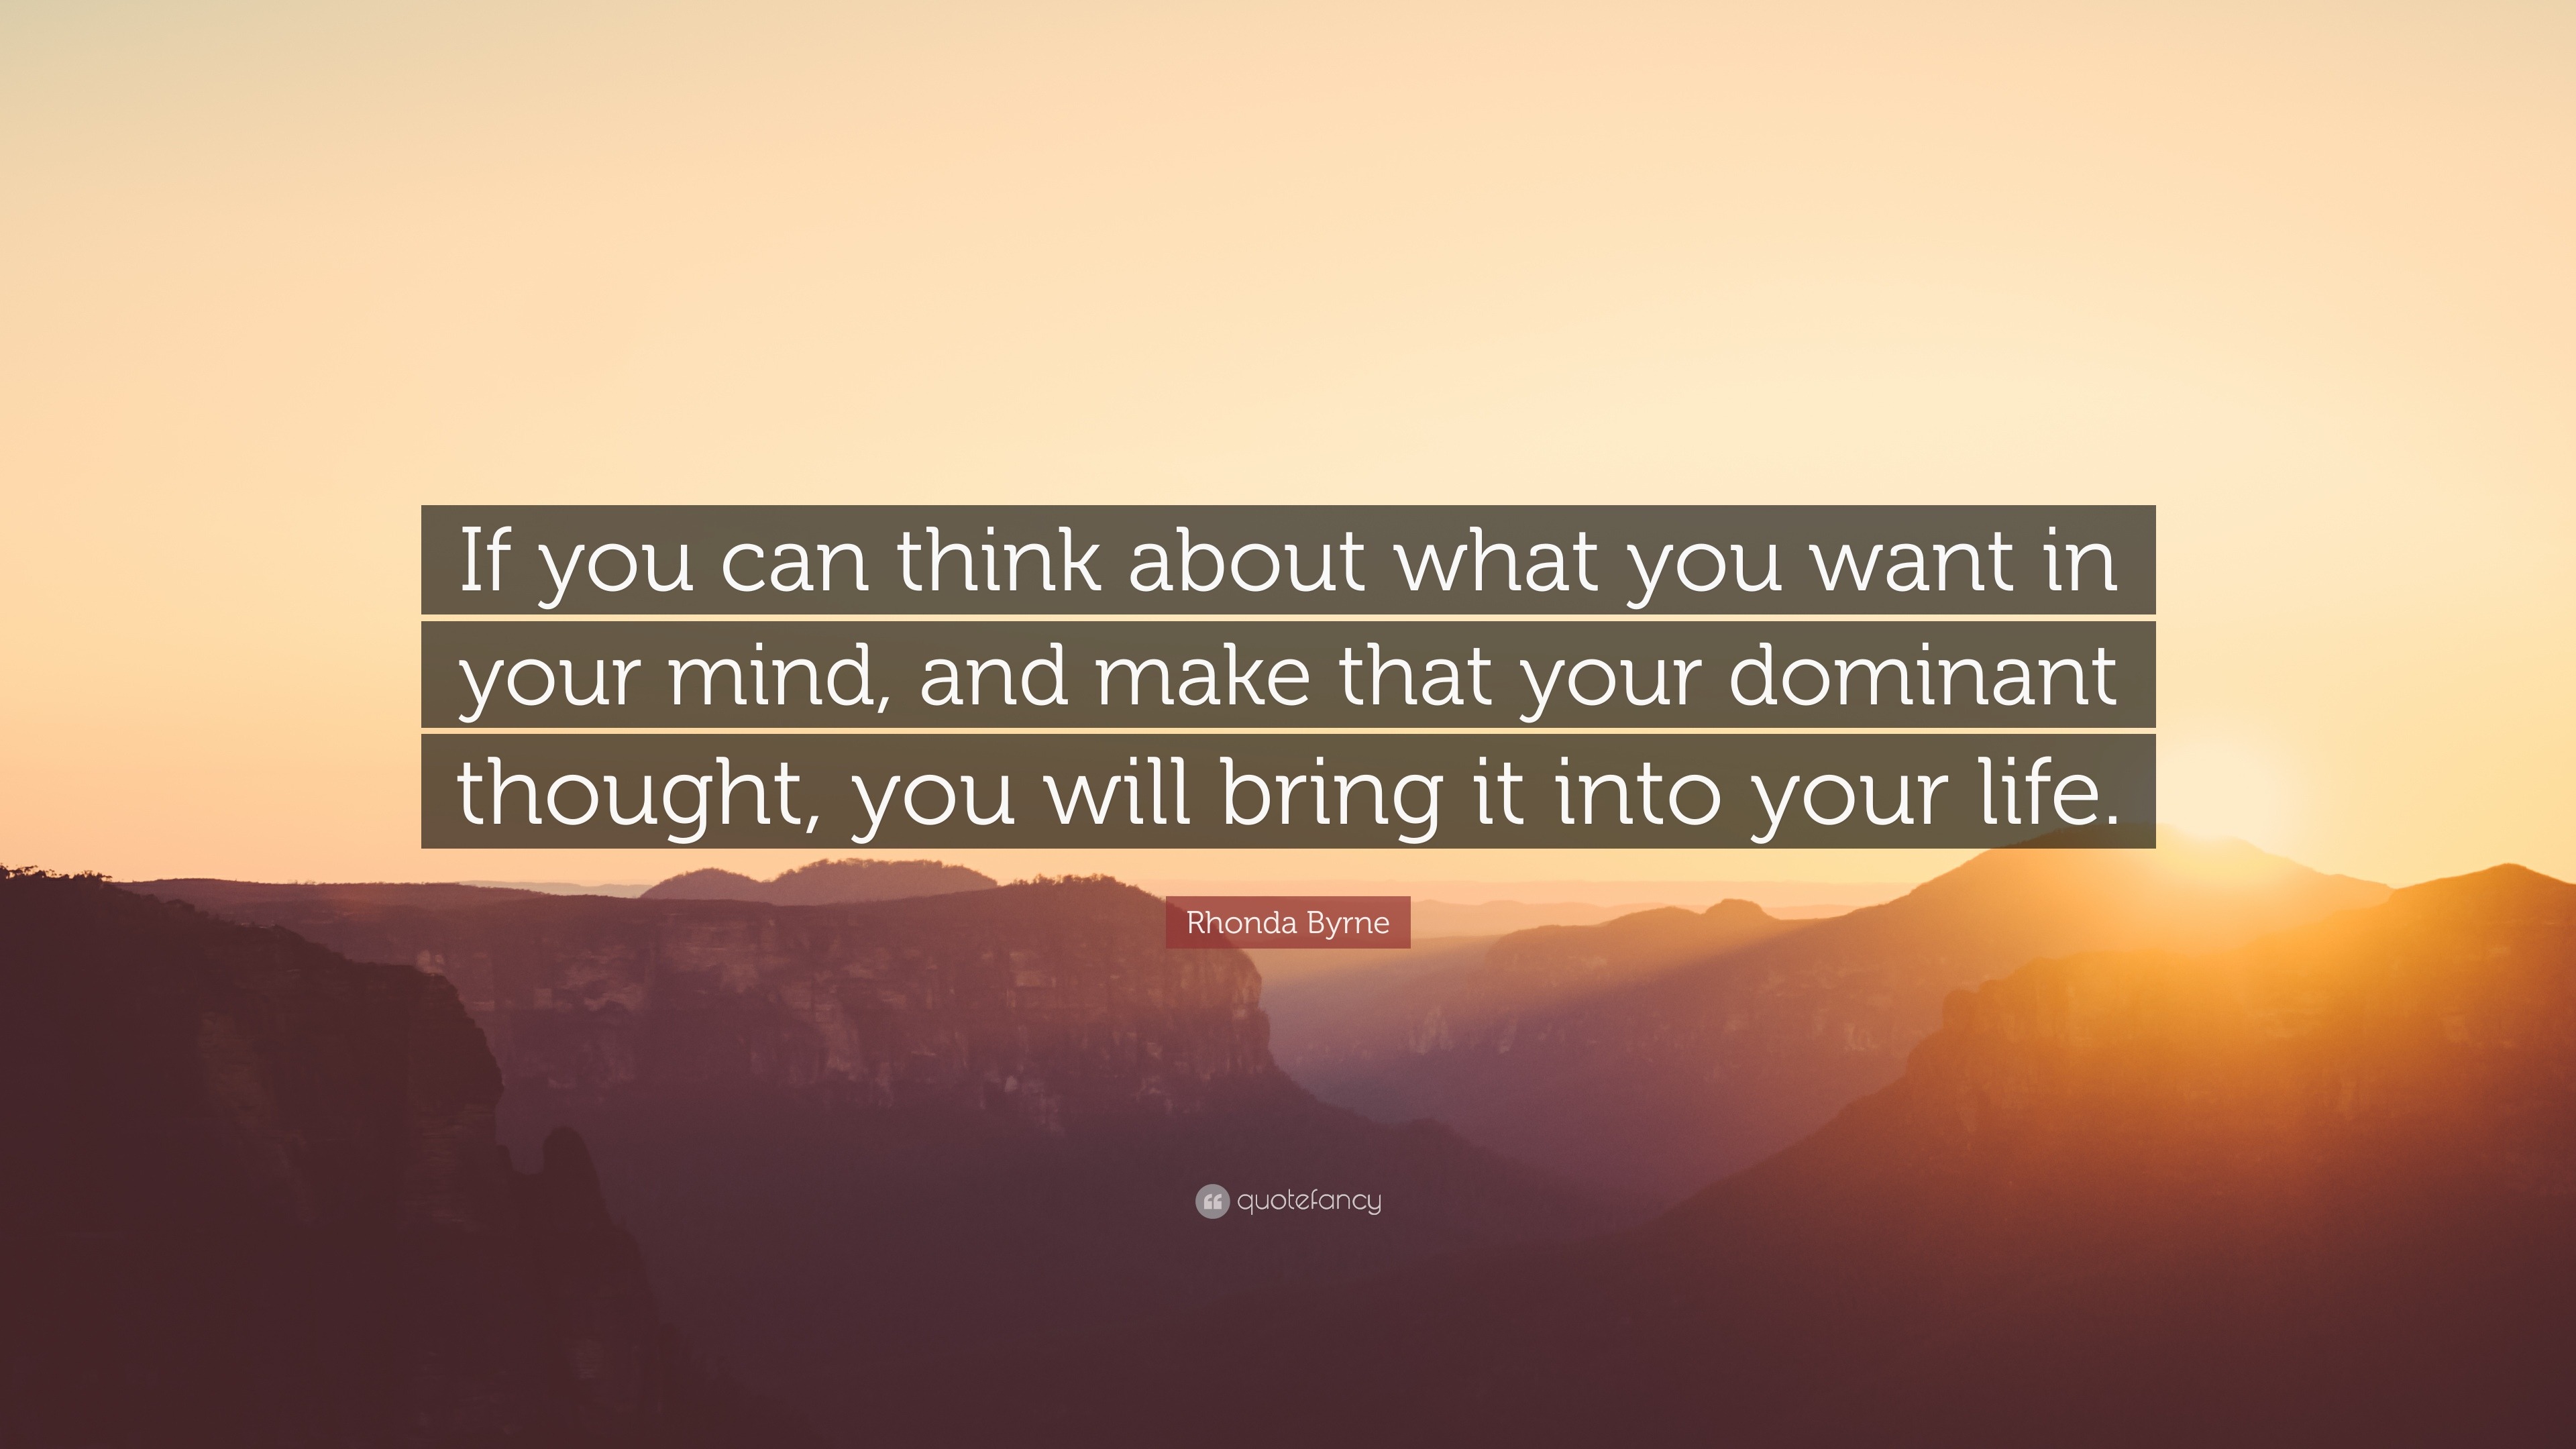 Rhonda Byrne Quote “If you can think about what you want in your mind